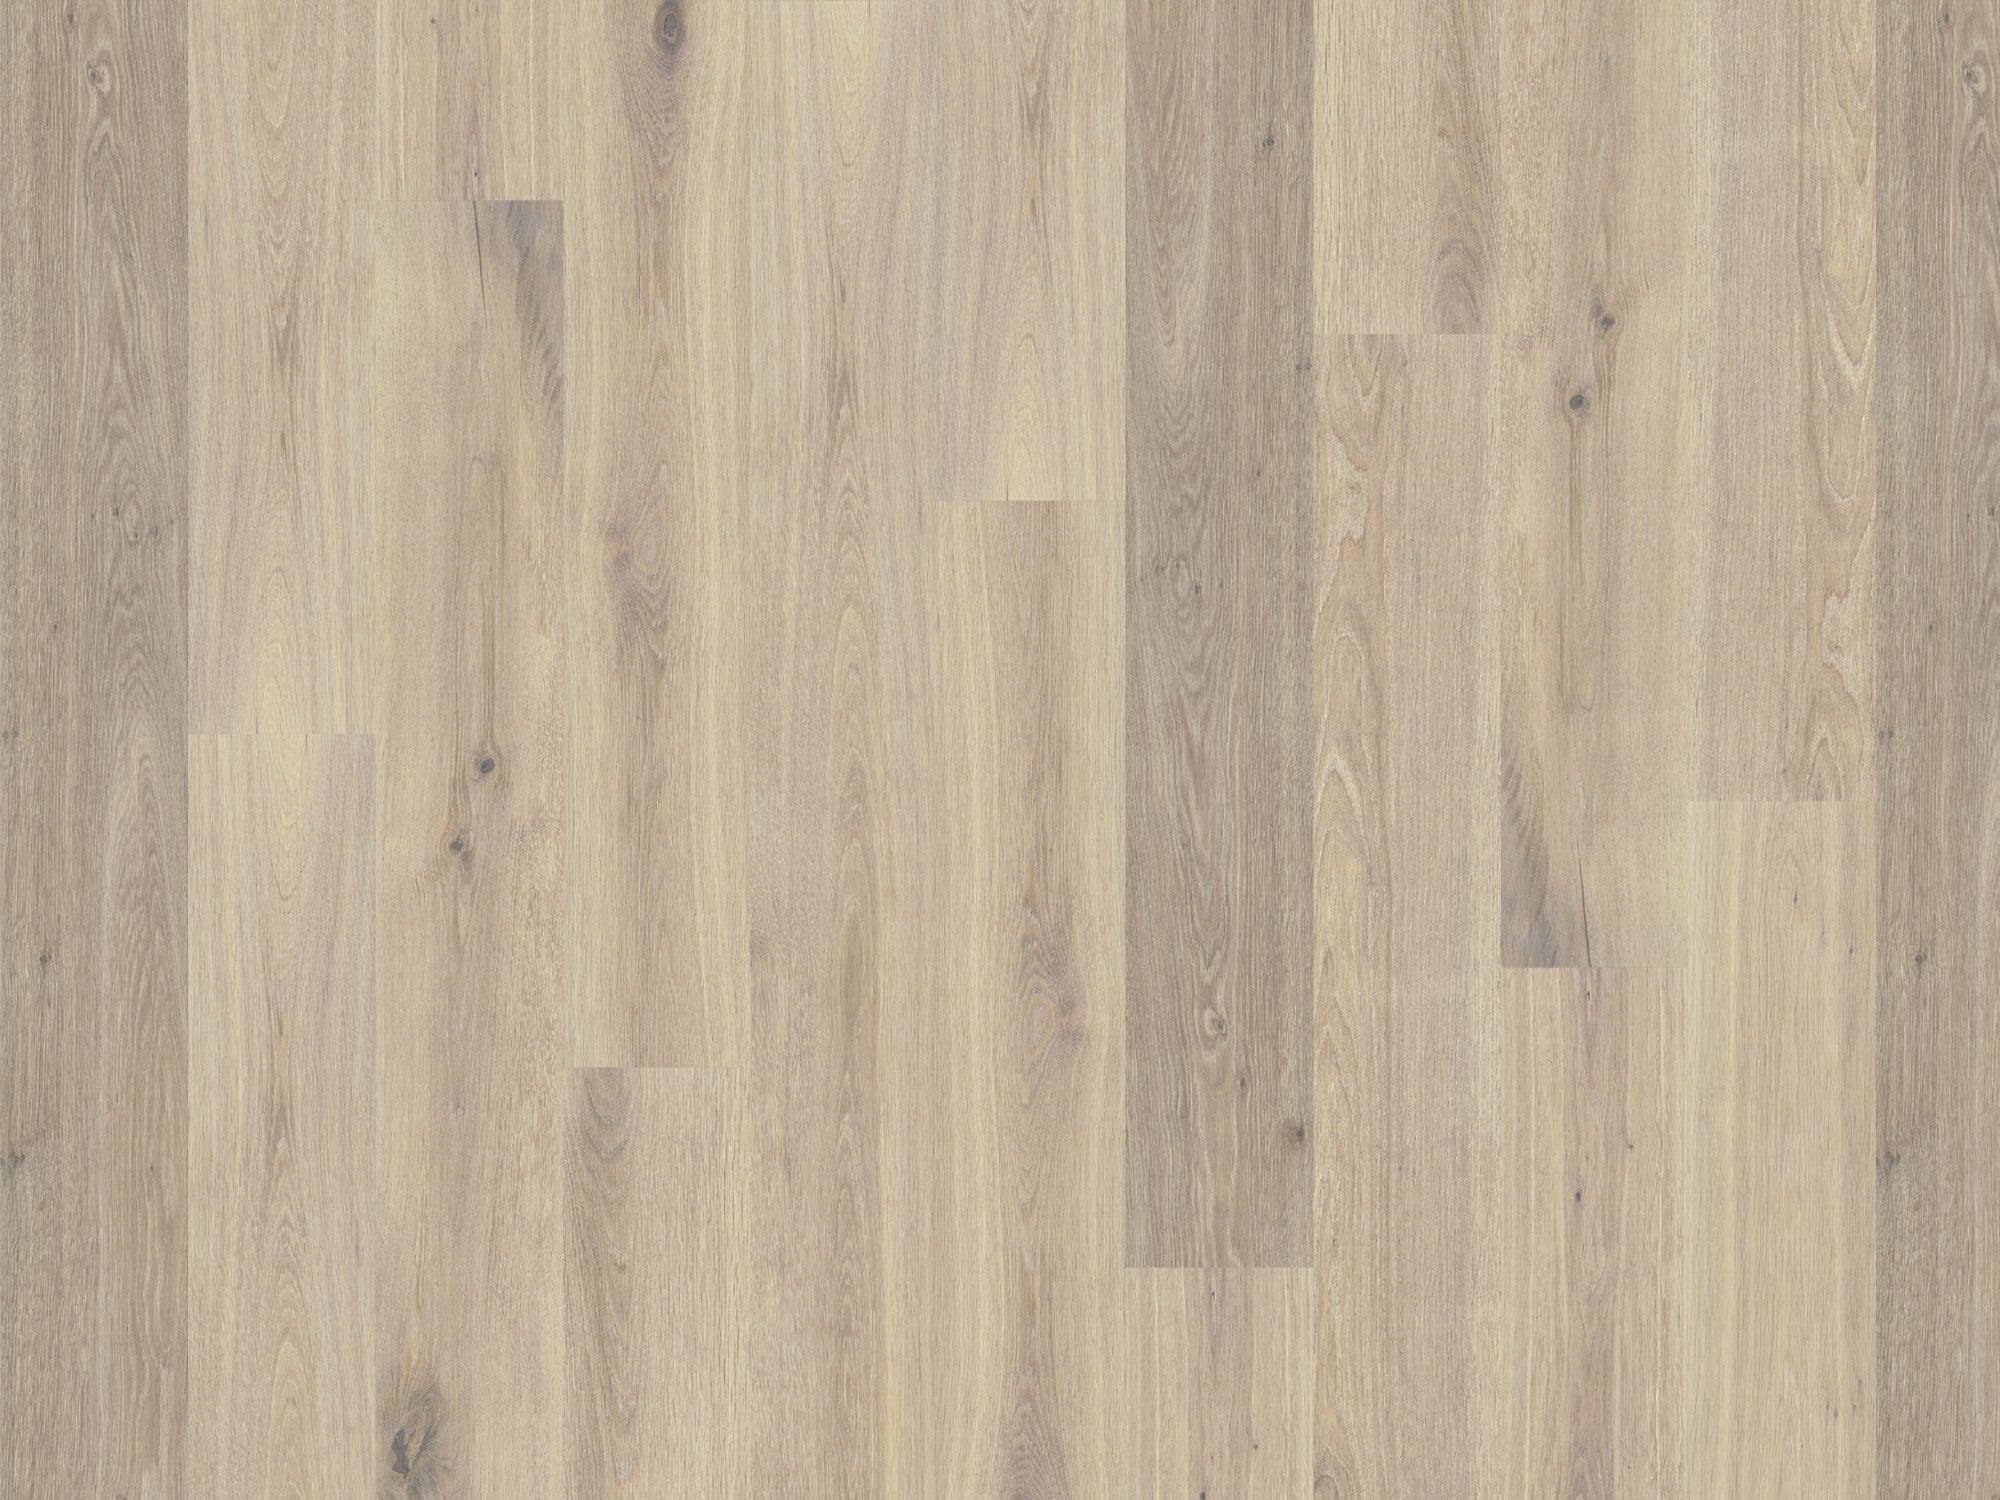 duchateau signature global winds mistral european oak engineered hardnatural wood floor uv lacquer finish for interior use distributed by surface group international